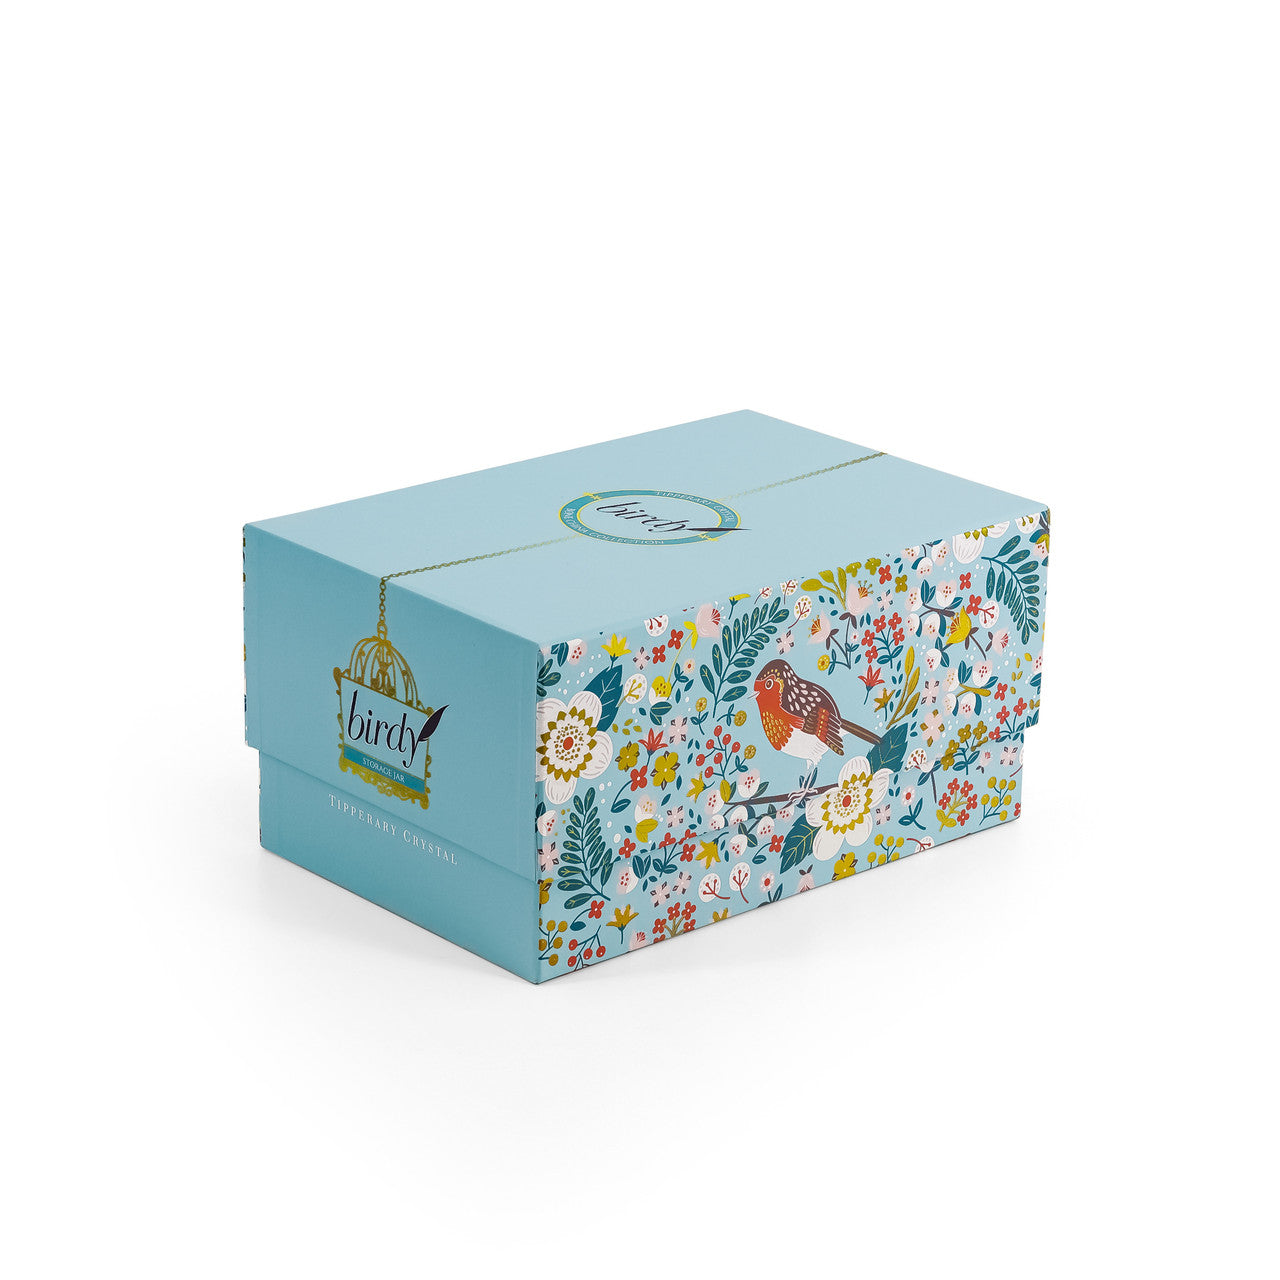 Tipperary Crystal Birdy Storage Jar - Robin - New 2022  New to our collection, this birdy storage jar come beautifully illustrated and presented in a rigid Tipperary Crystal gift box. Makes a wonderful gift to be enjoyed.  The Birdy Collection is a series of 6 exclusively commissioned illustrations inspired by native Irish birds; Bullfinch, Goldfinch, Blue tit, Greenfinch, Kingfisher and Robin.